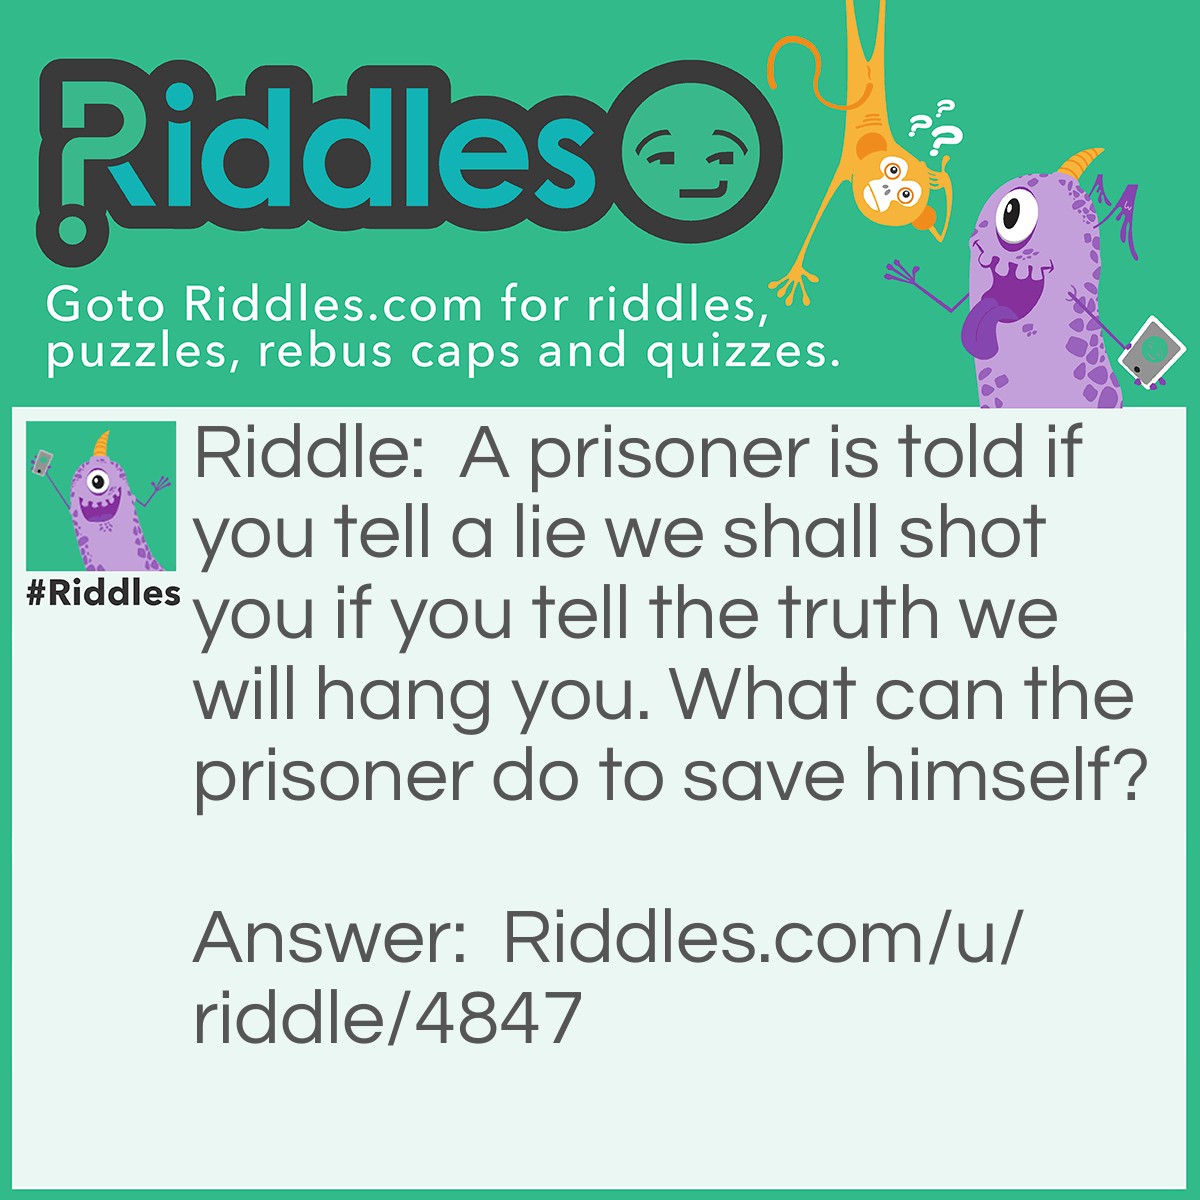 Riddle: A prisoner is told if you tell a lie we shall shot you if you tell the truth we will hang you. What can the prisoner do to save himself? Answer: He will say... You shall hang me.